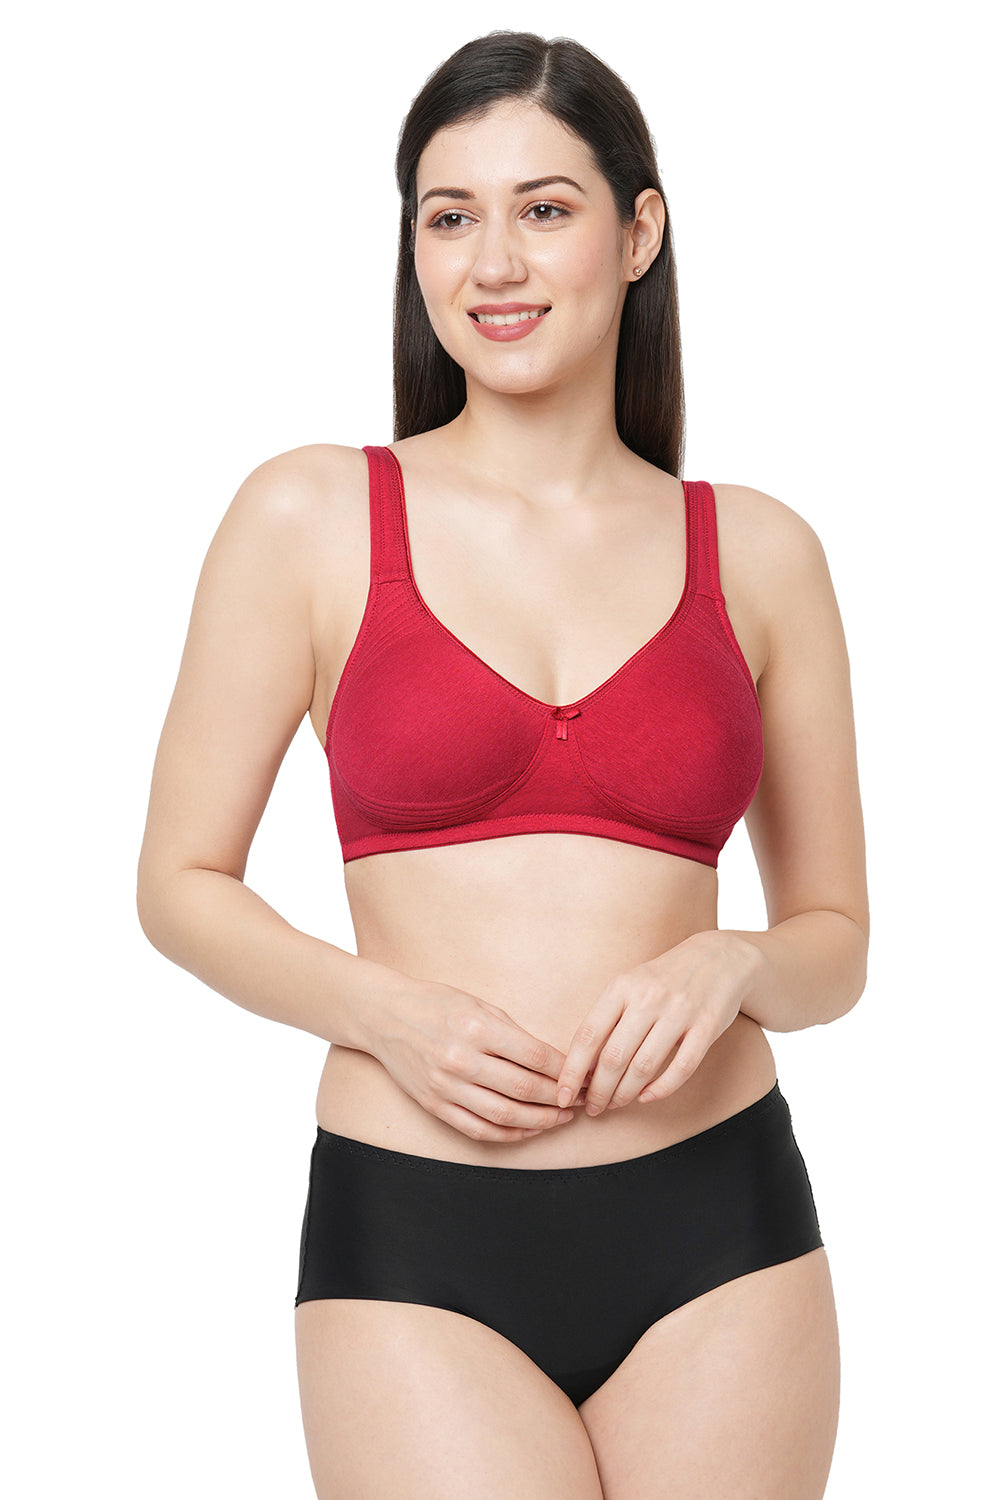 Buy Berry's Intimatess Maroon & Red Solid Non-Wired Backless